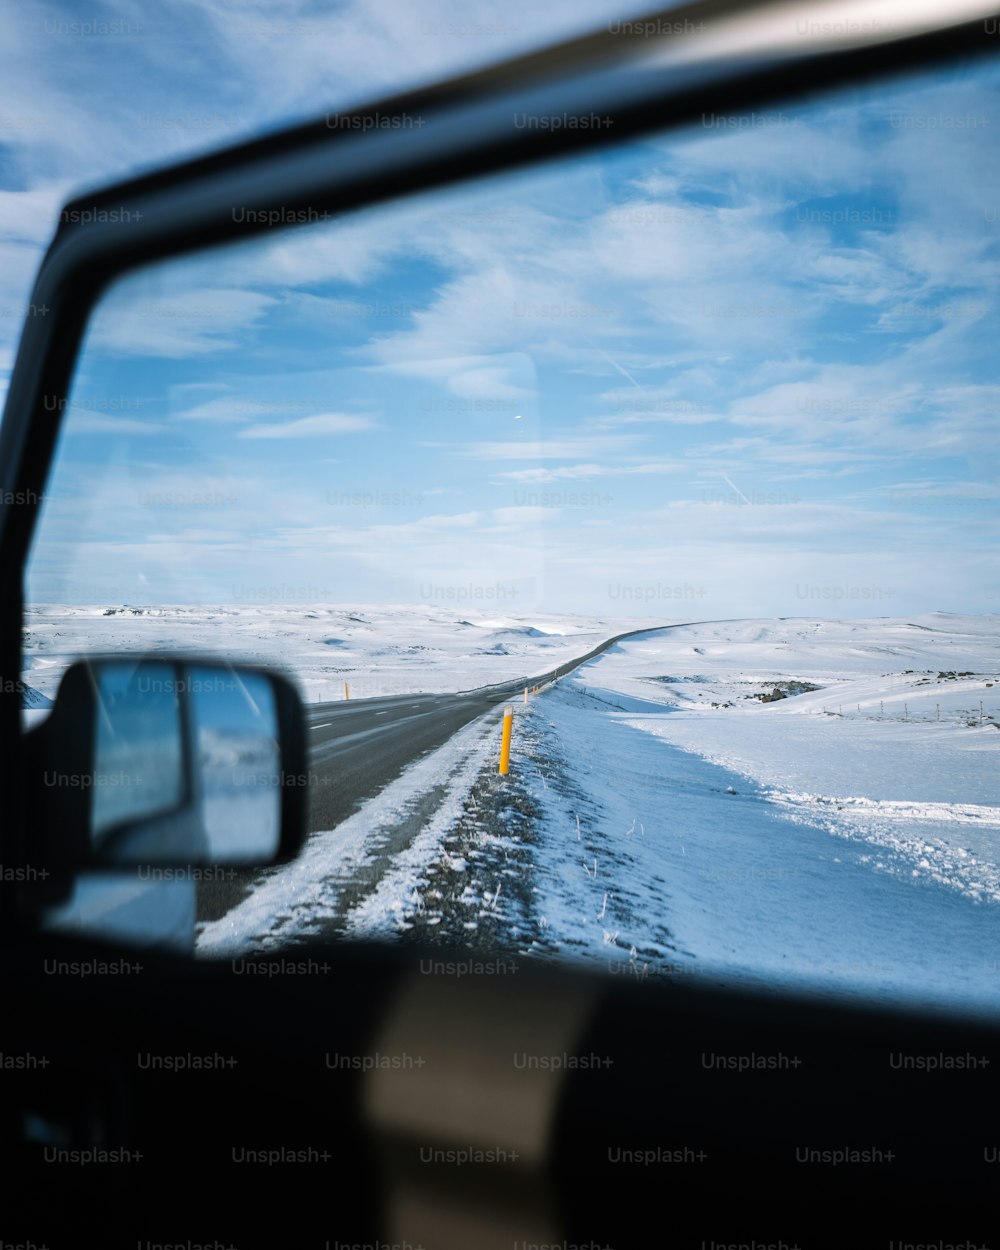 a view of a snowy road from inside a vehicle